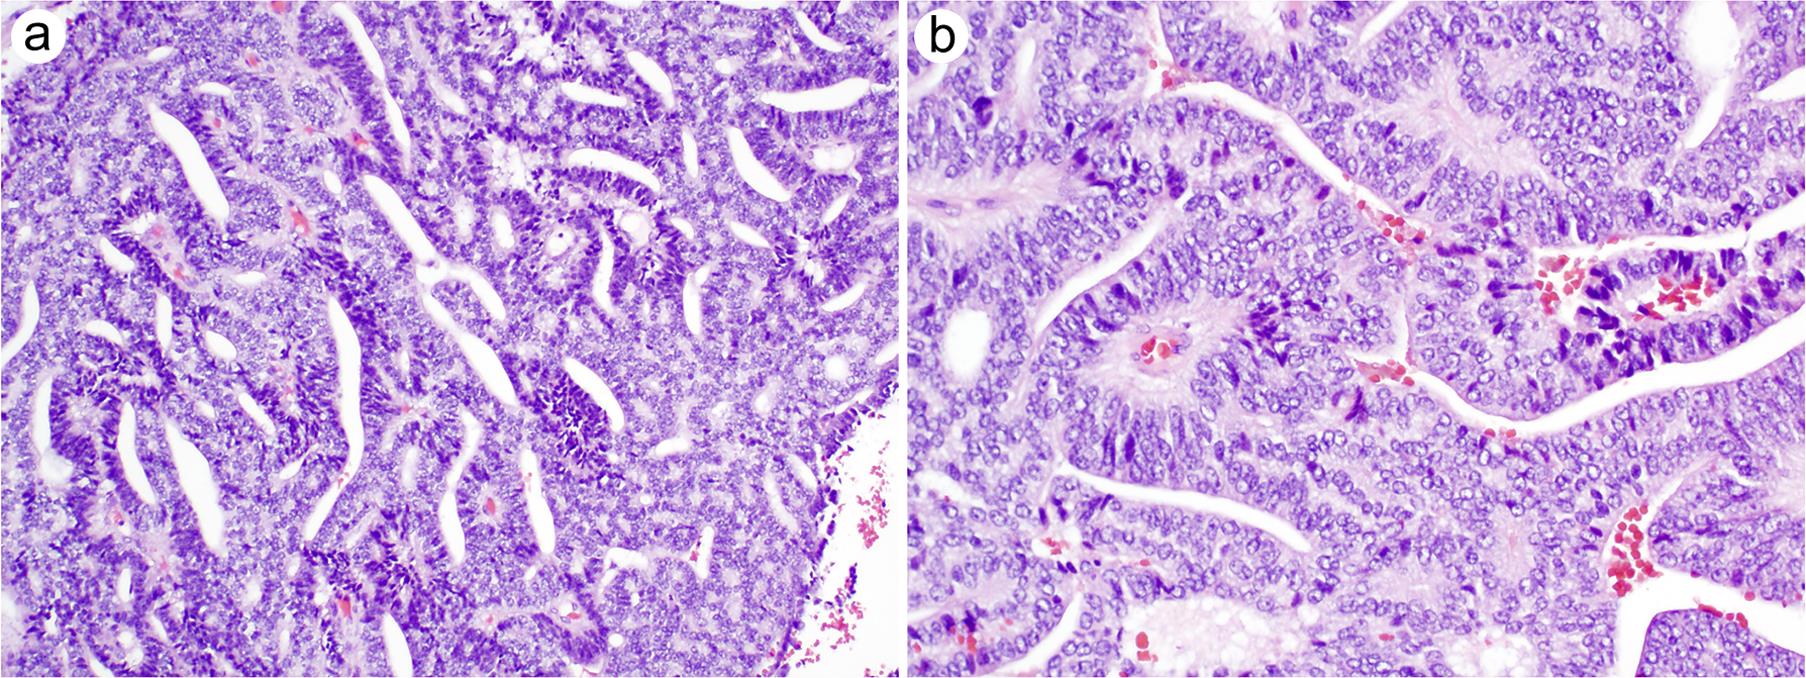 Ductal carcinoma exhibits cribriform and papillary growth patterns.